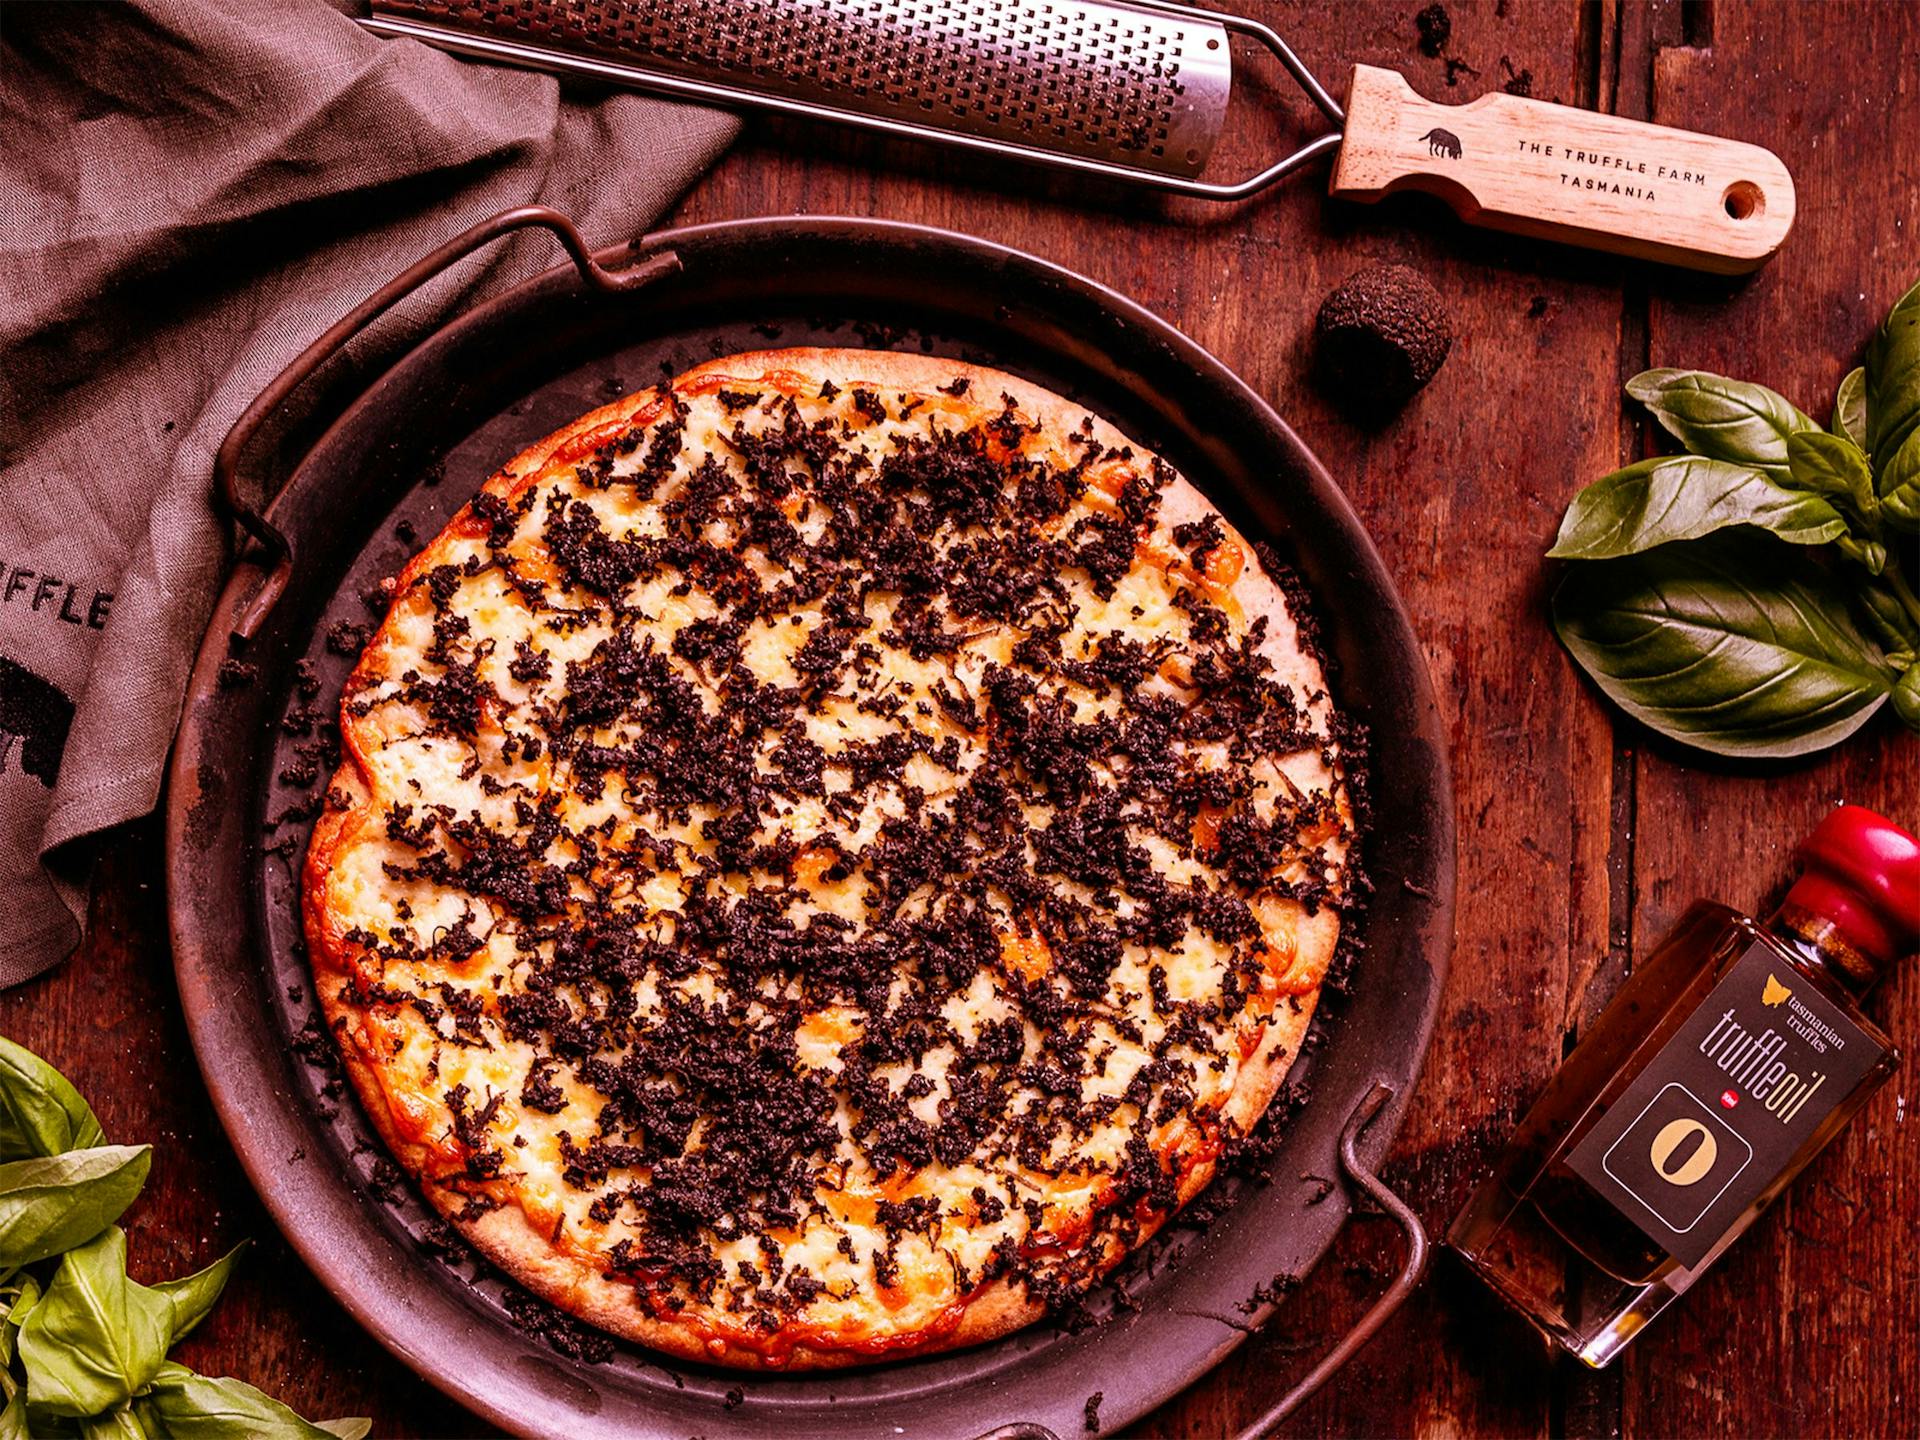 A truffle pizza sitting on a wooden table surrounded by truffle oil and basil